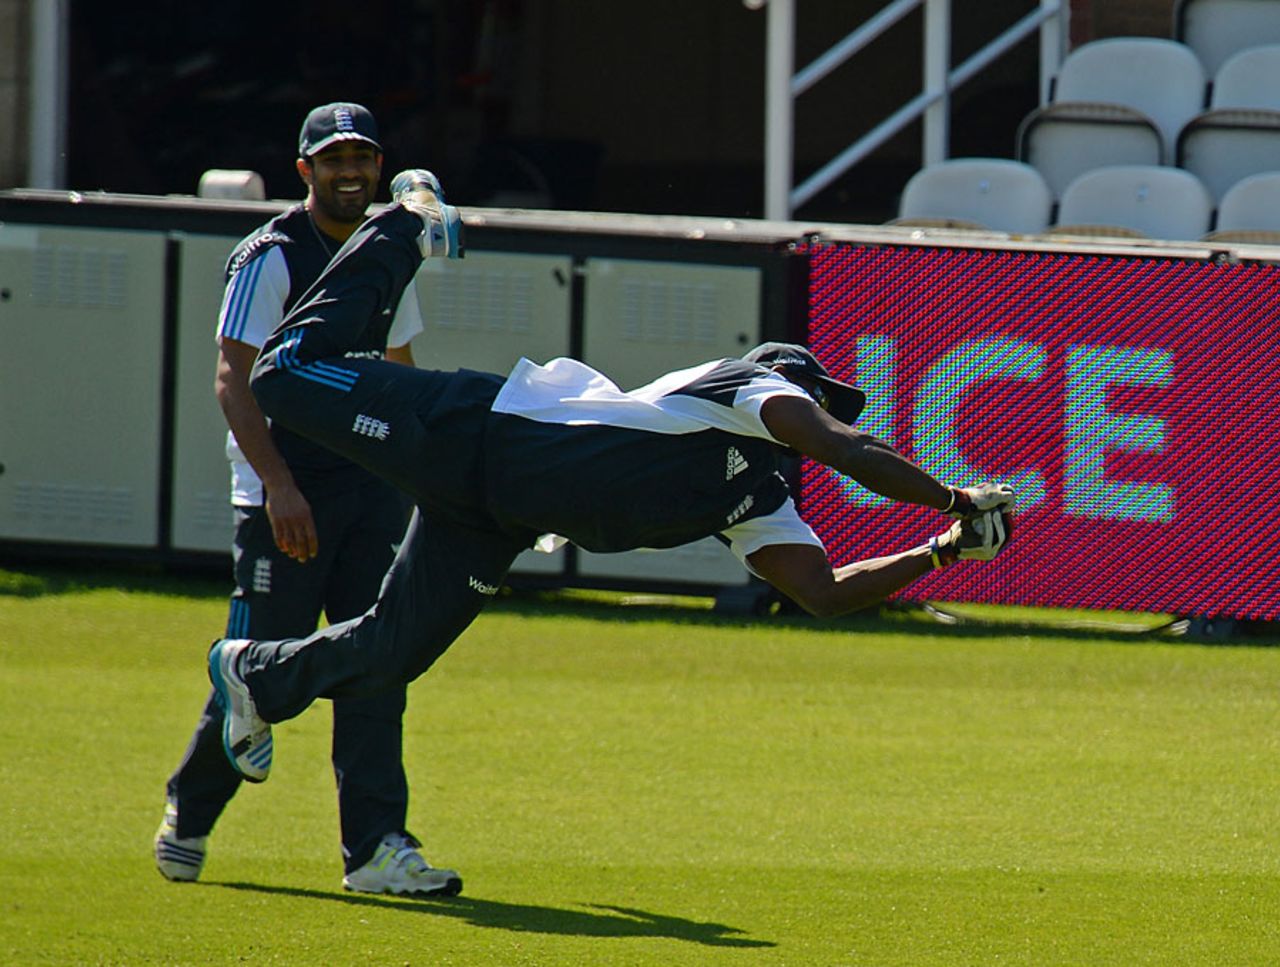 Michael Carberry dives for a catch, The Oval, May 19, 2014